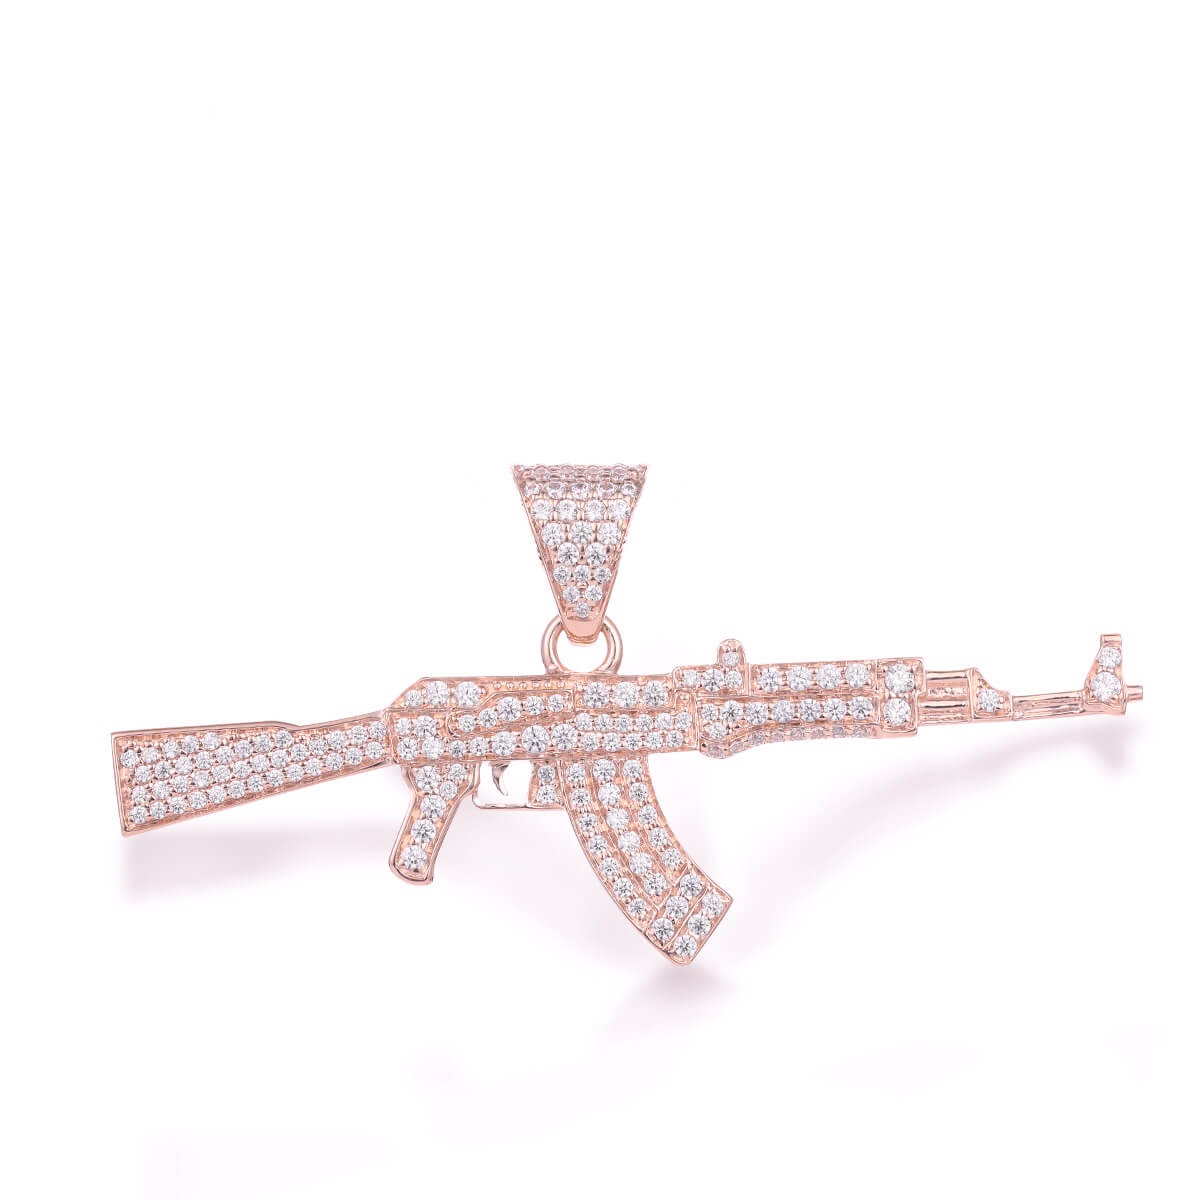 Bling Multcolor AK-47 Necklace *limited quantity* | QvJewelry